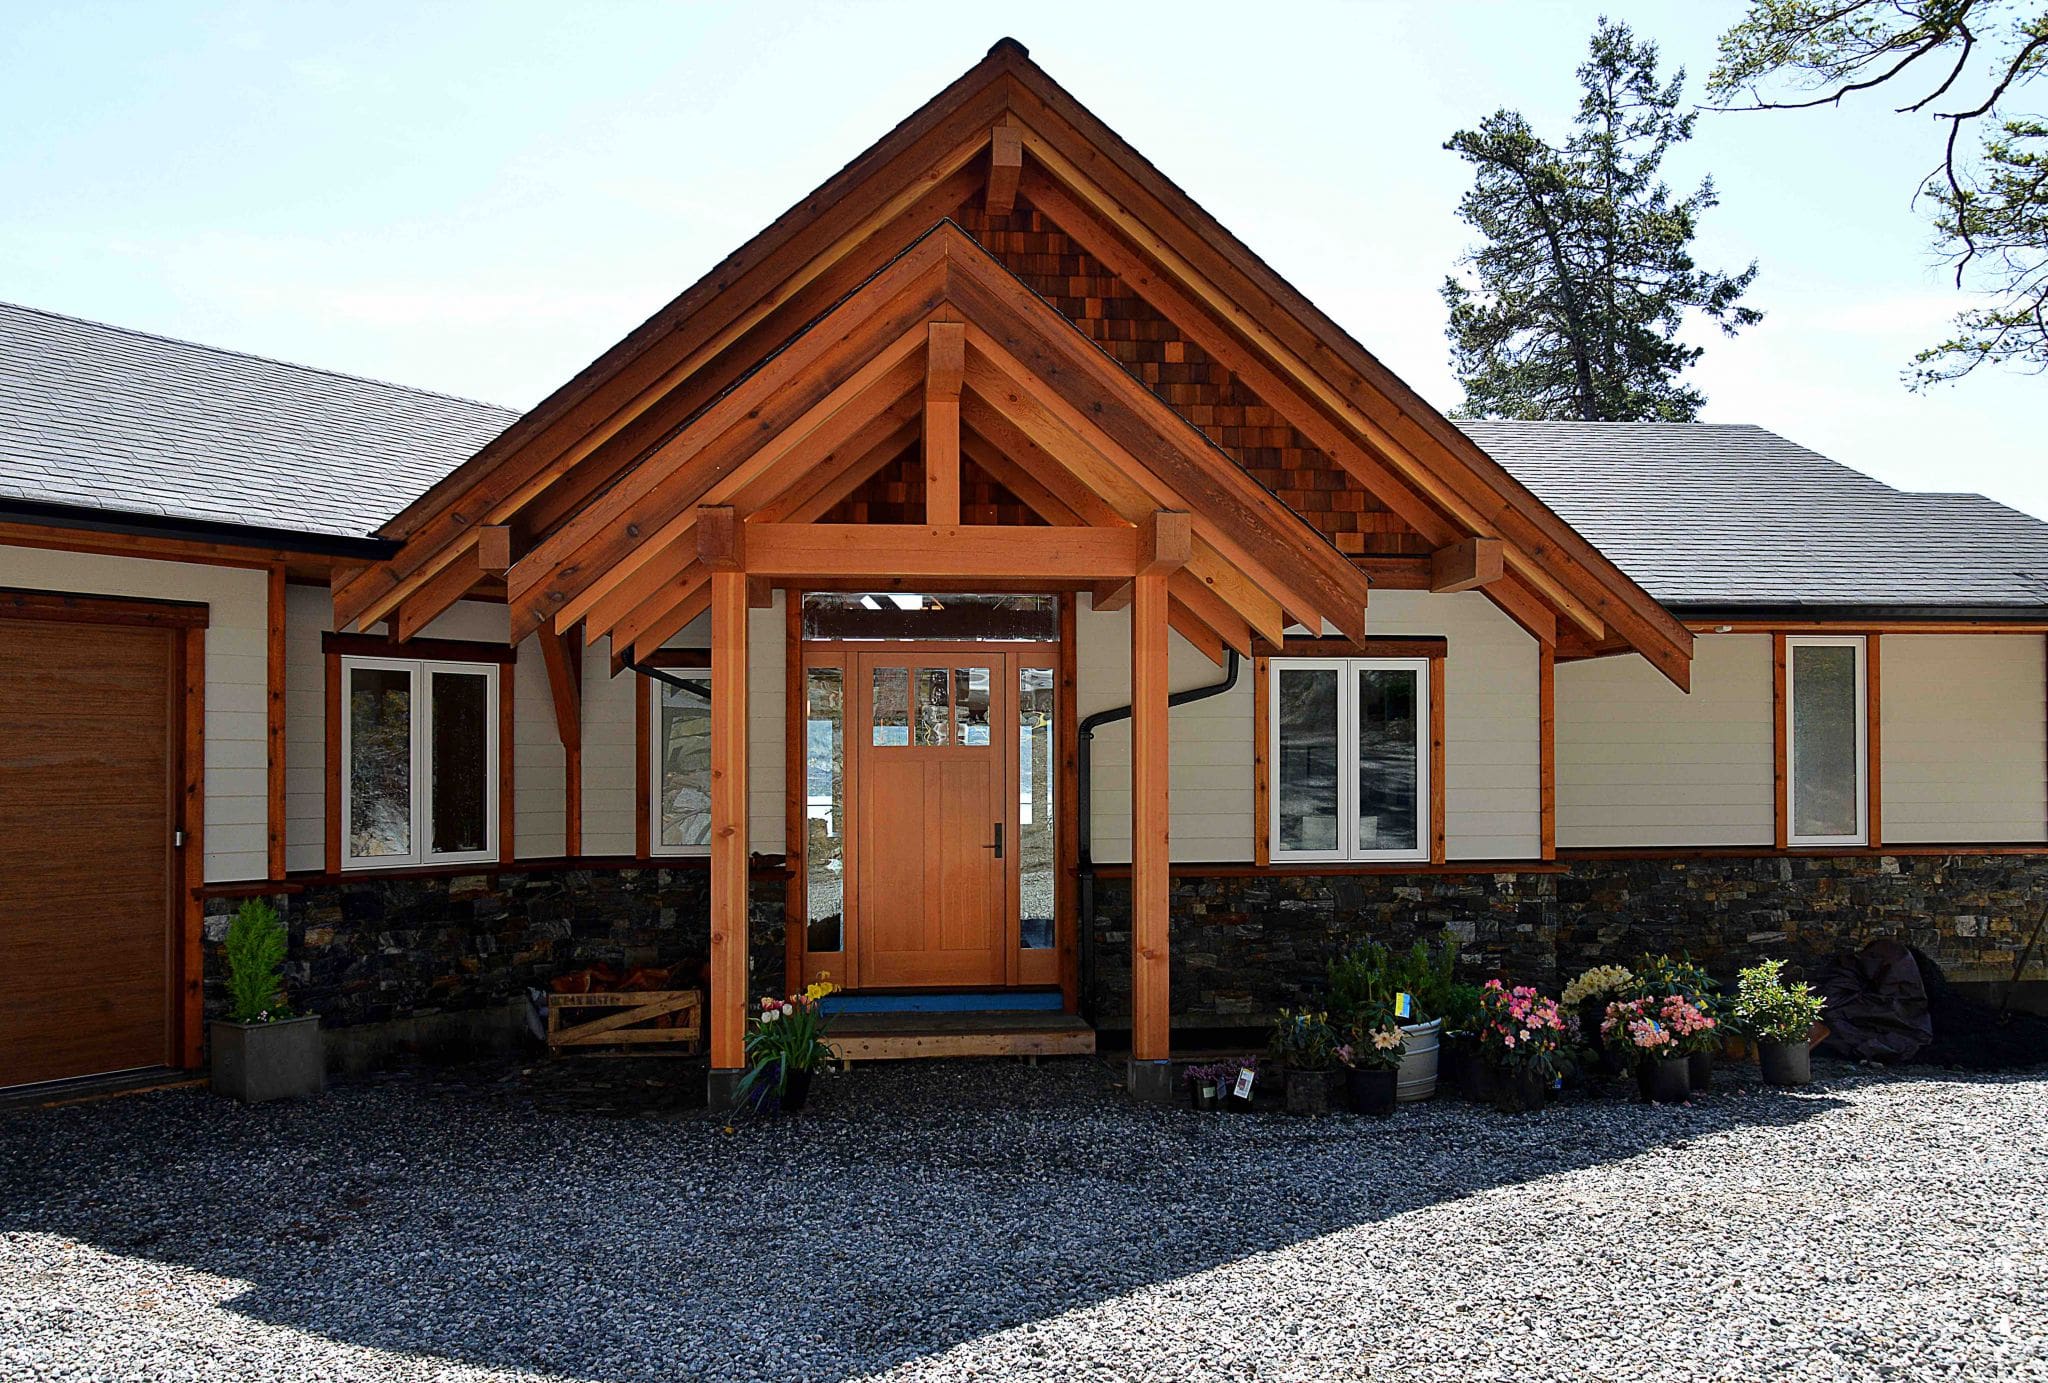 The entranceway of a modern timber frame home